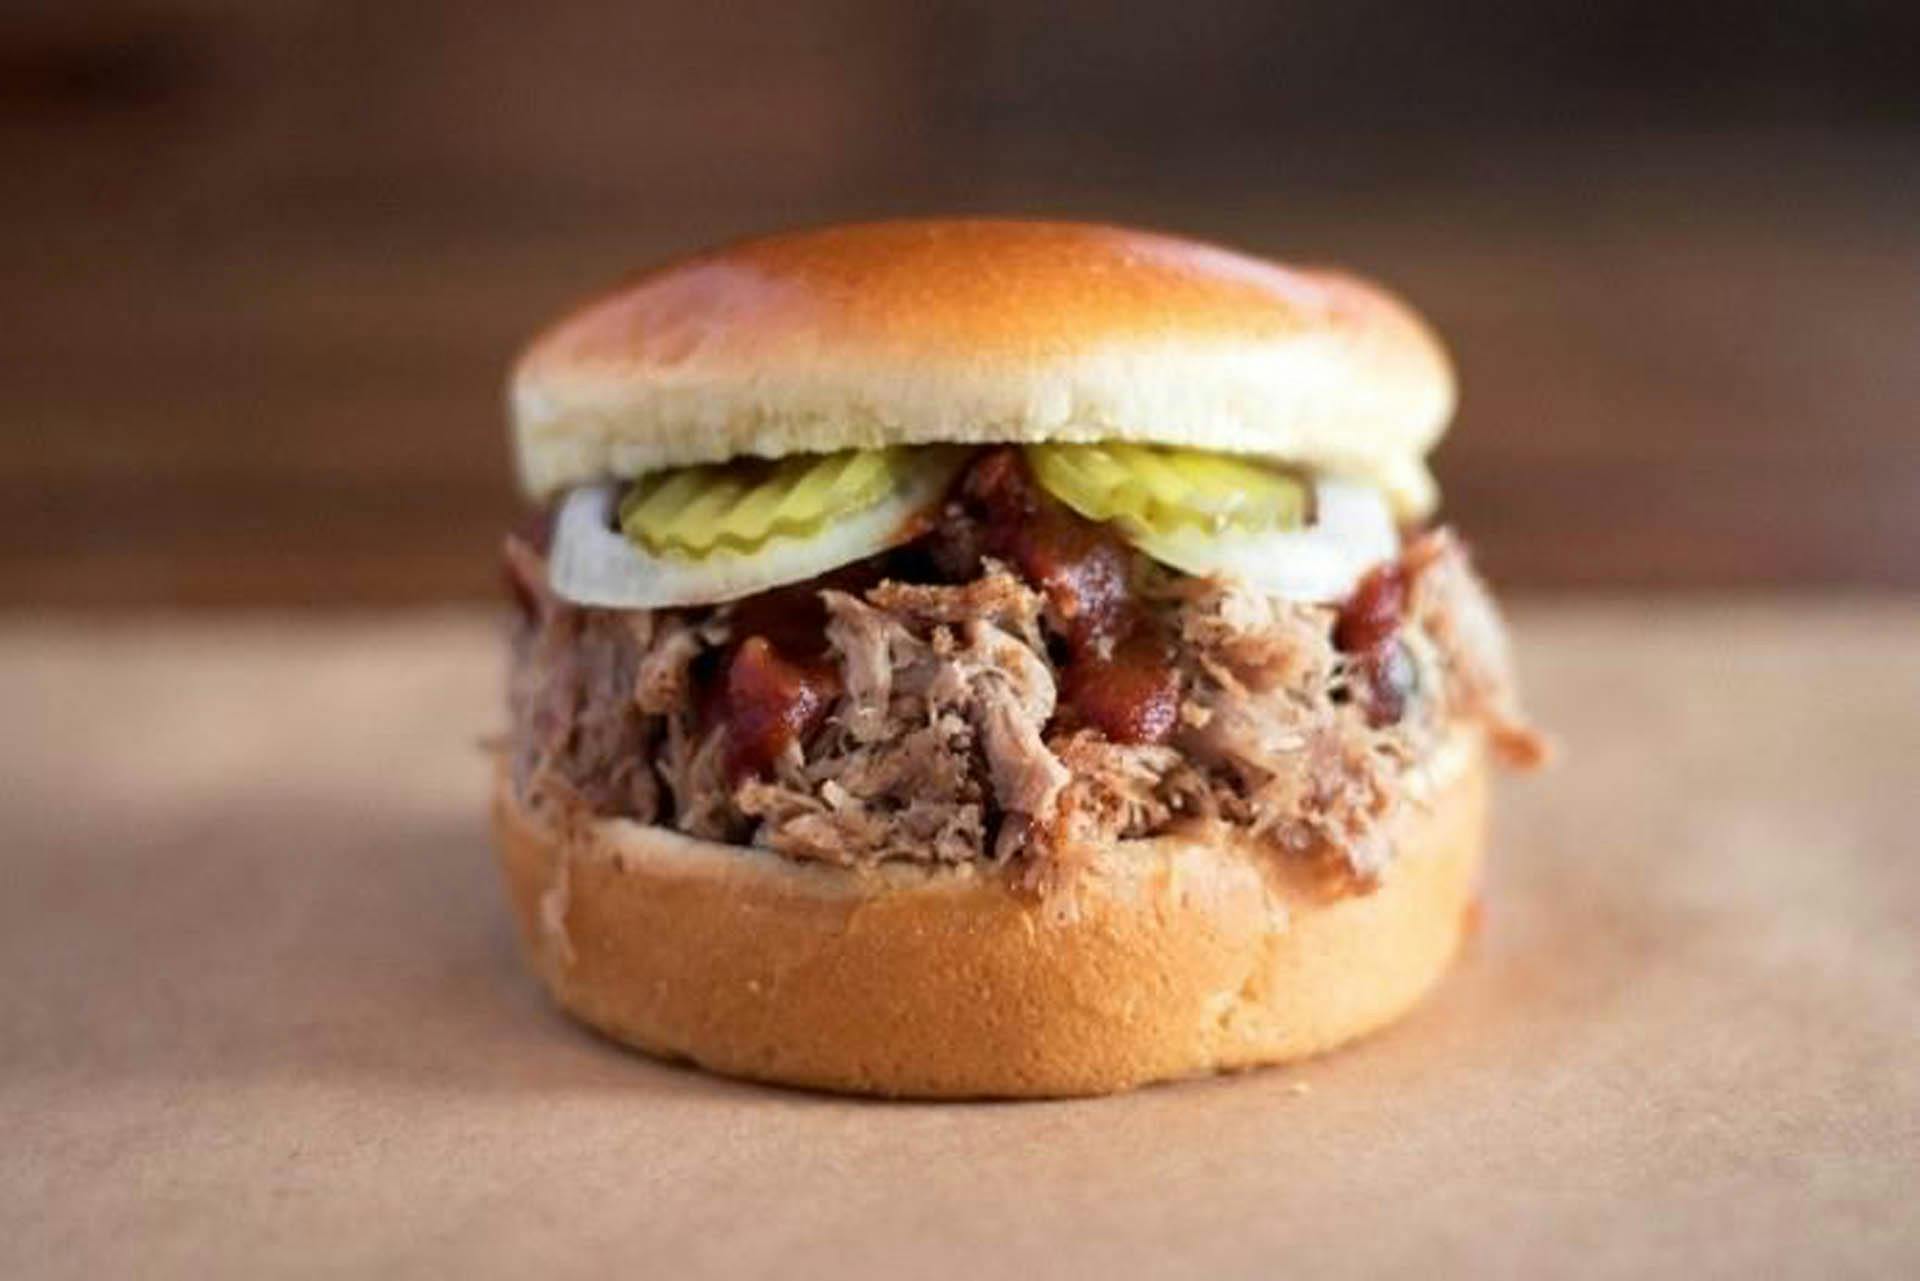 Hold On to Your Boots, Dickey’s Barbecue Has Arrived at the Golden Triangle!